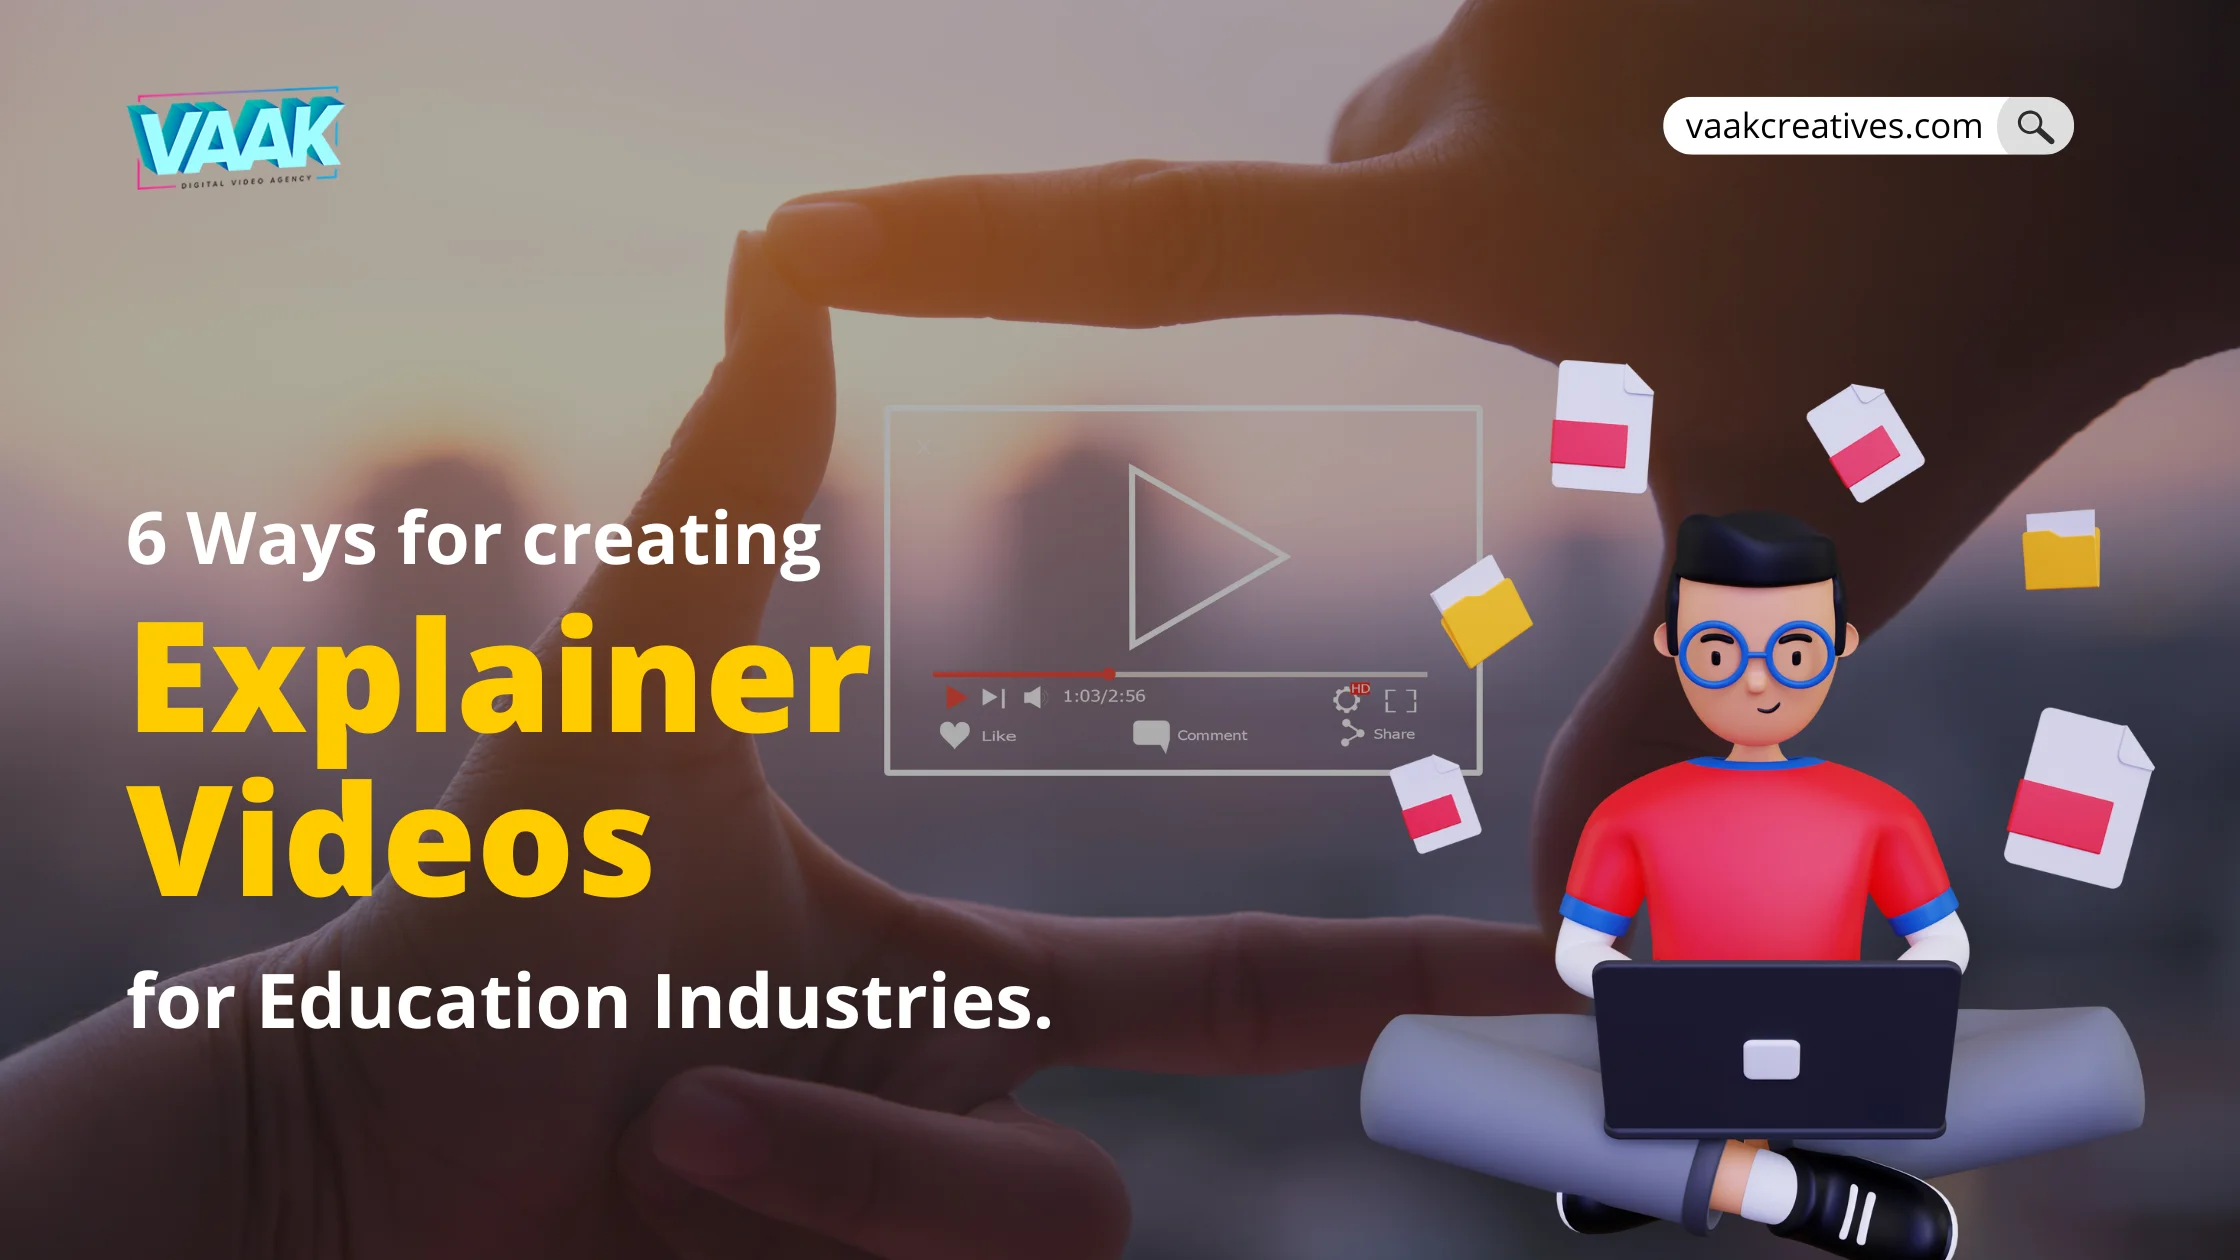 blog/6_Ways_for_Creating_Explainer_Videos_for_the_Education_Industry_Image.webp